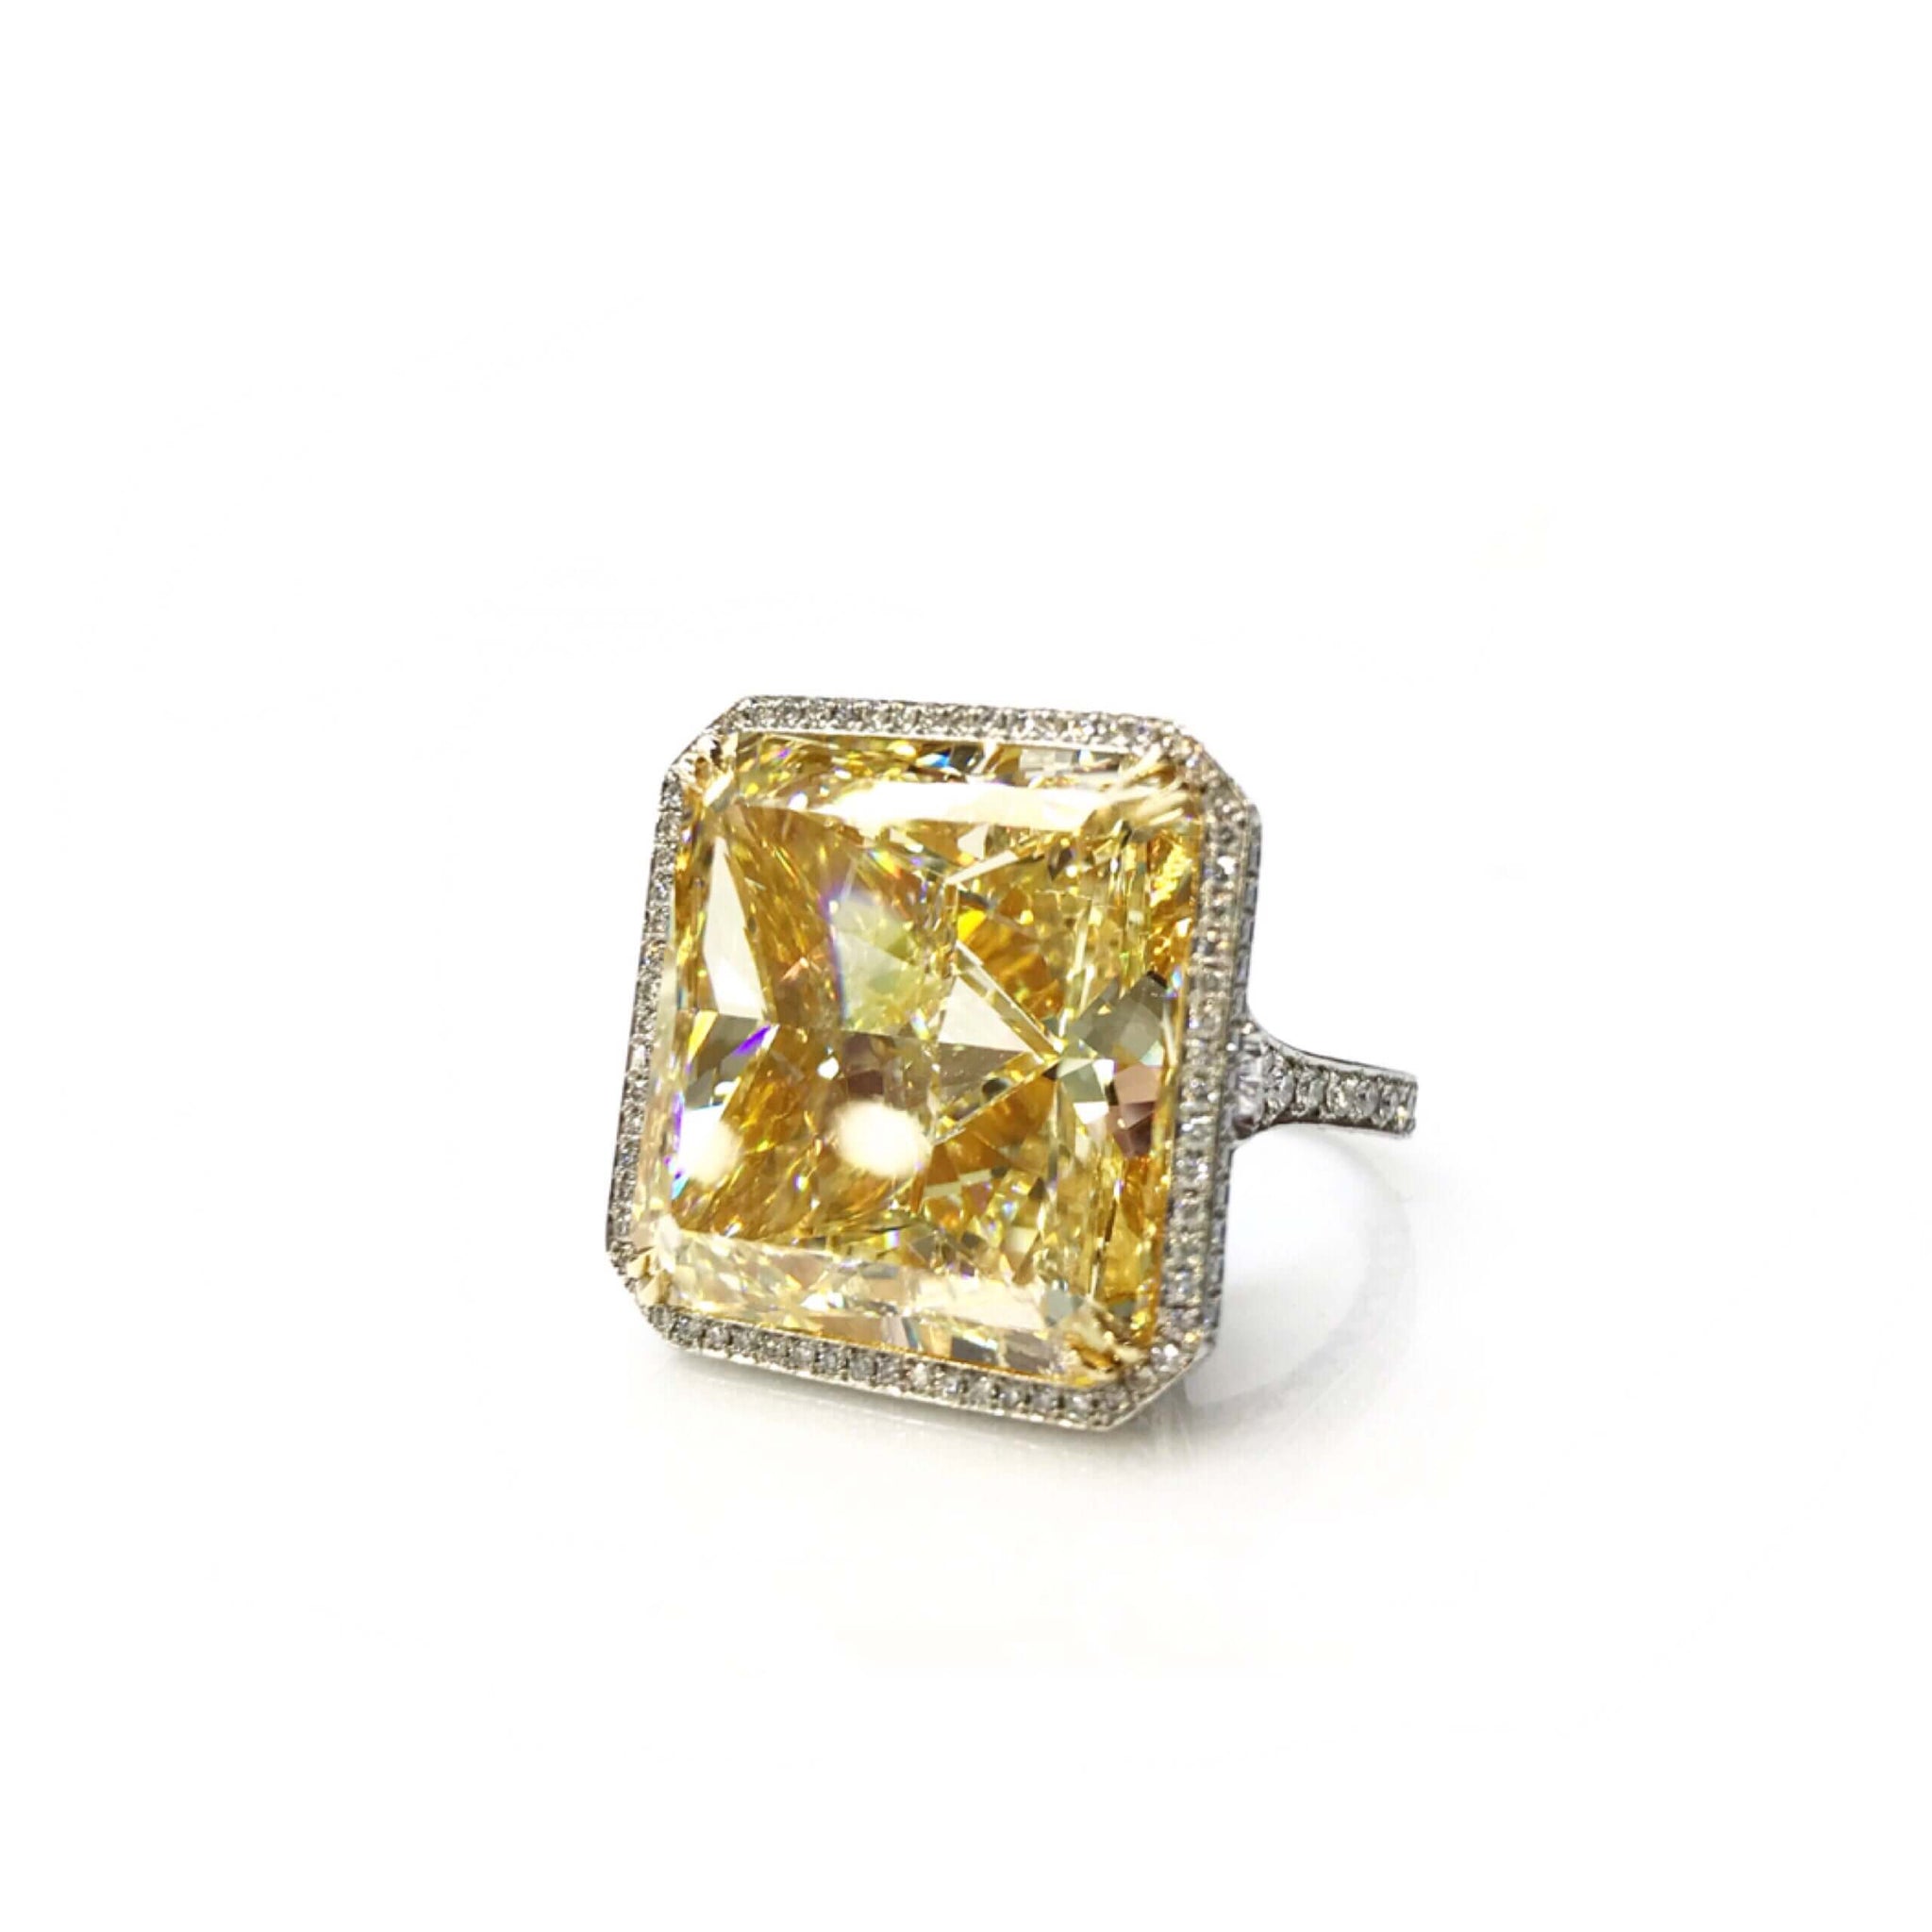 Fancy Yellow Diamond Ring Radiant Cut 40 carat Halo Ring in Platinum & 18K Gold Front View